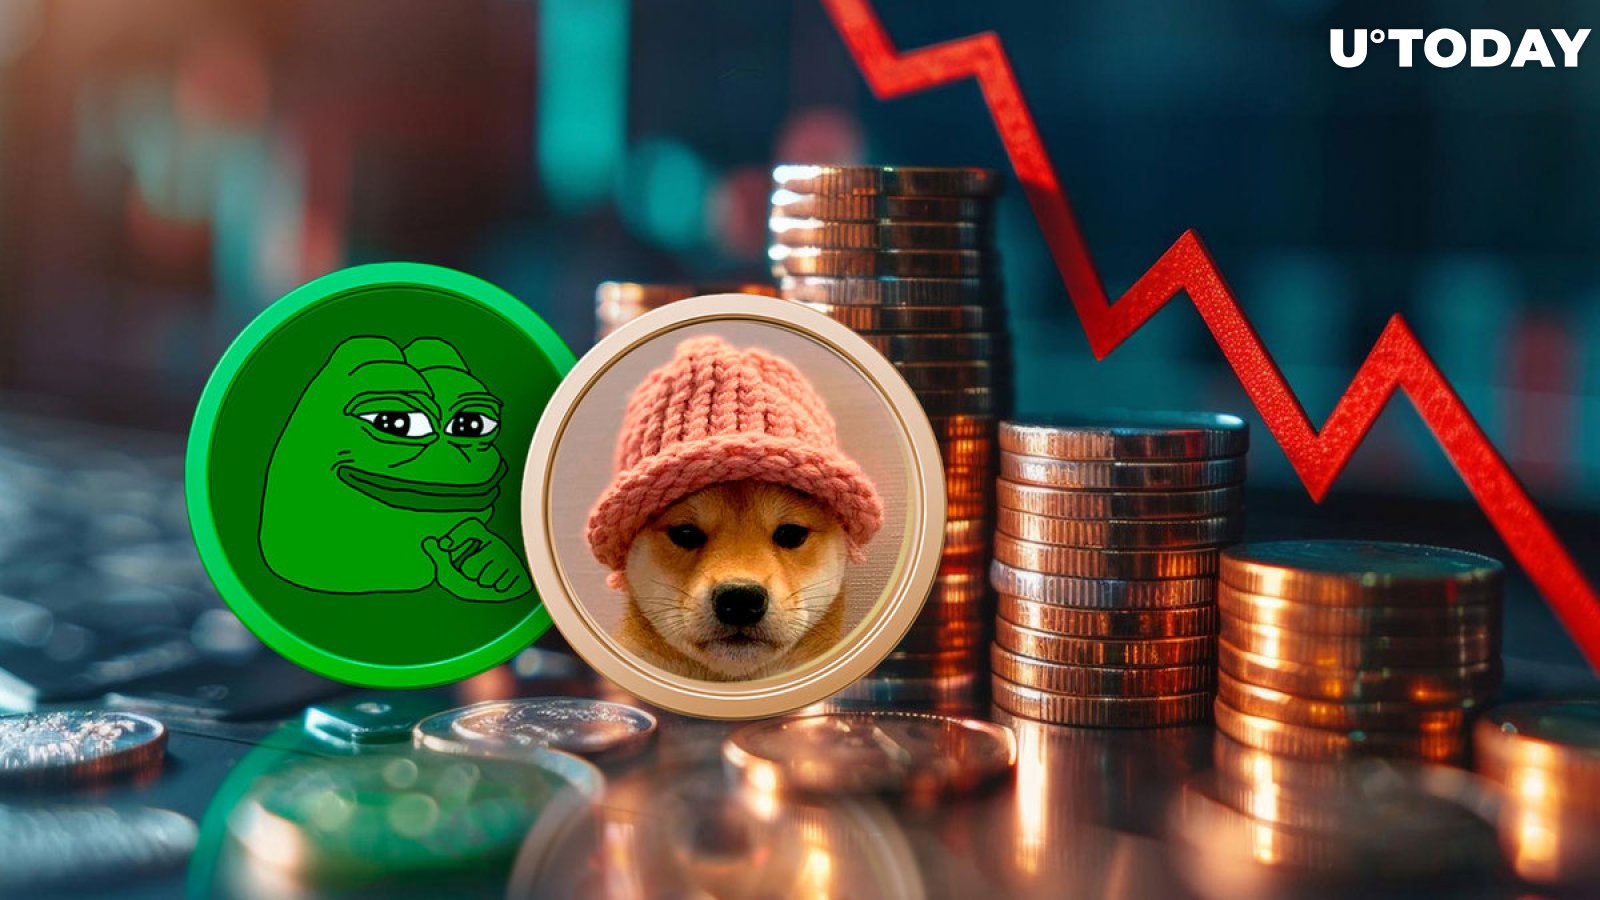 PEPE, Dogwifhat See Major Losses as Crypto Market Dives: Details